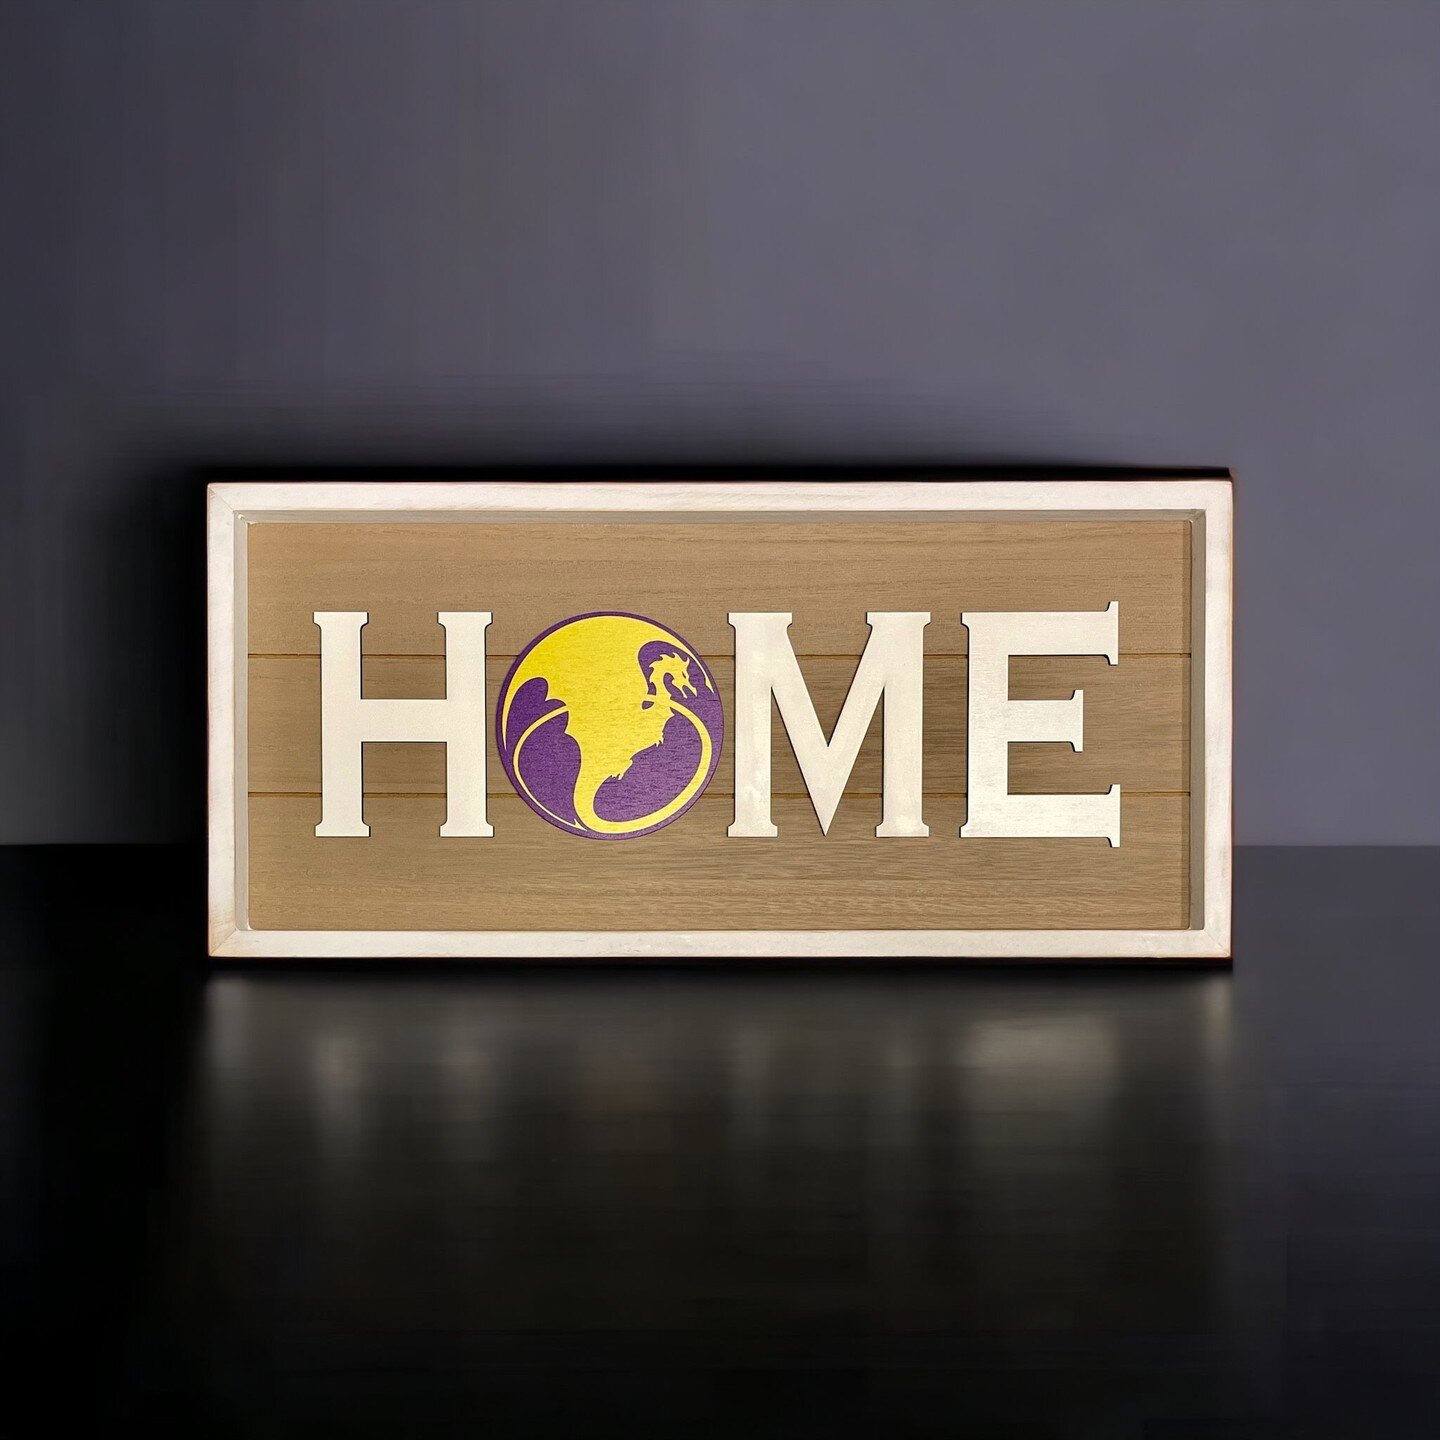 🐉 We have exciting news!🐉
Get ready to add a touch of magic to your living space with our limited-edition exclusive home sign featuring the iconic Dragon Con logo! Only 100 pieces will be available this year at booth 2101 on the 2nd floor.

Join us